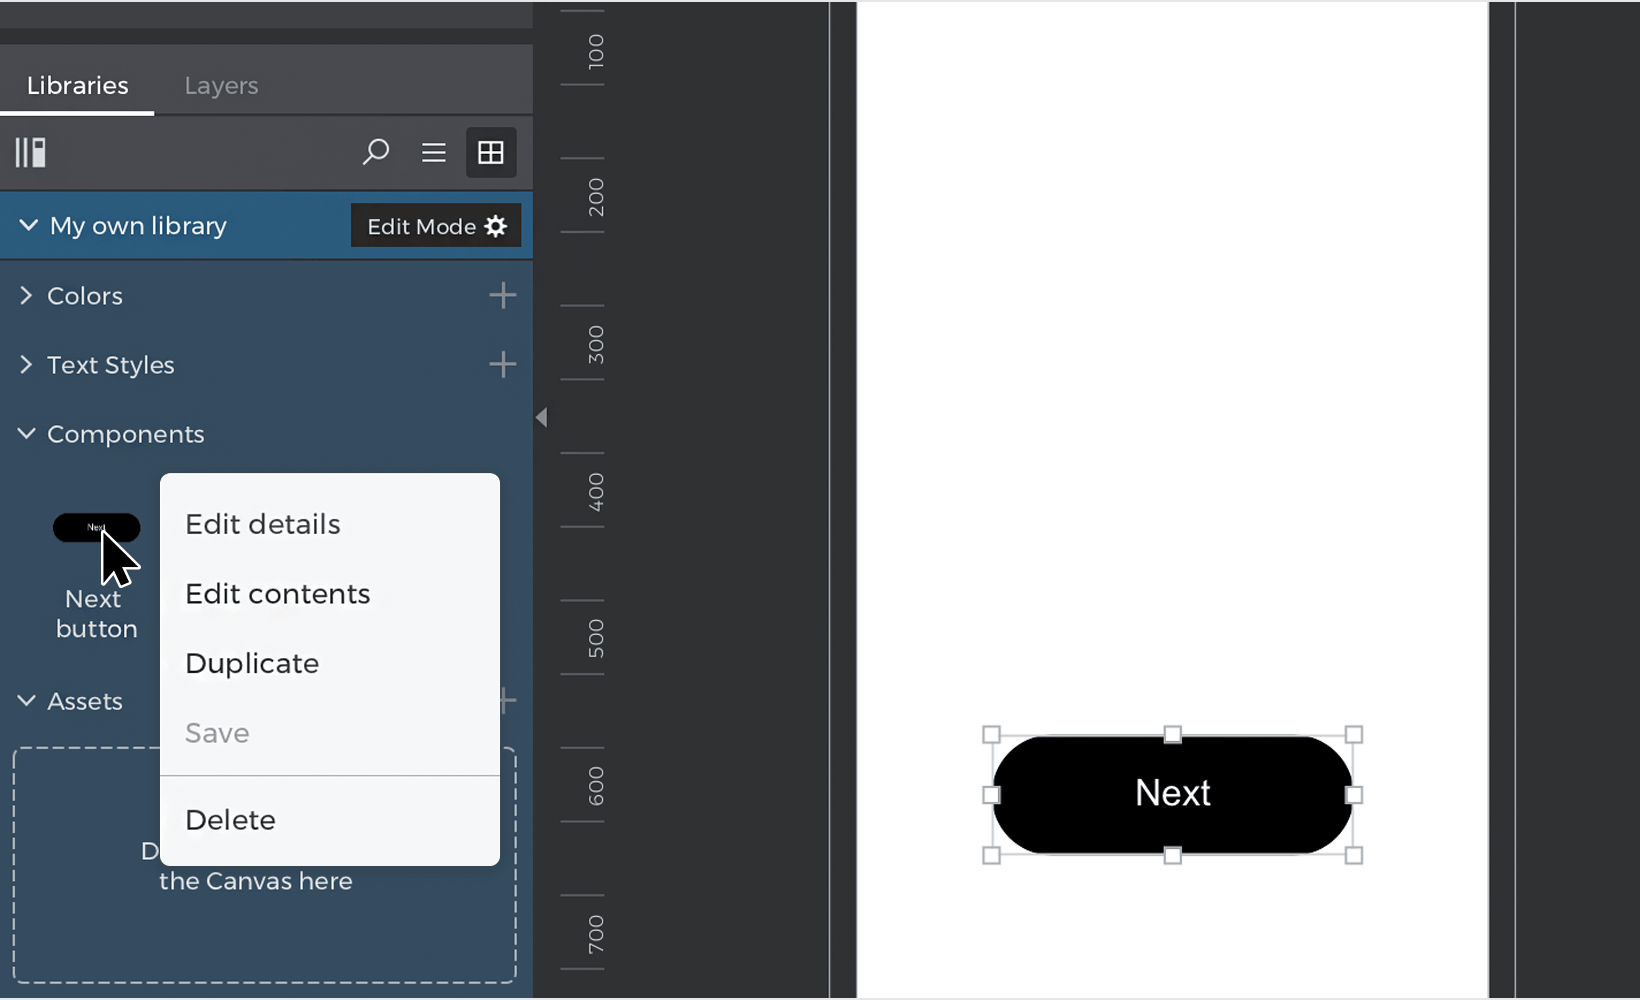 Right click on a widget to see options to edit its name or content